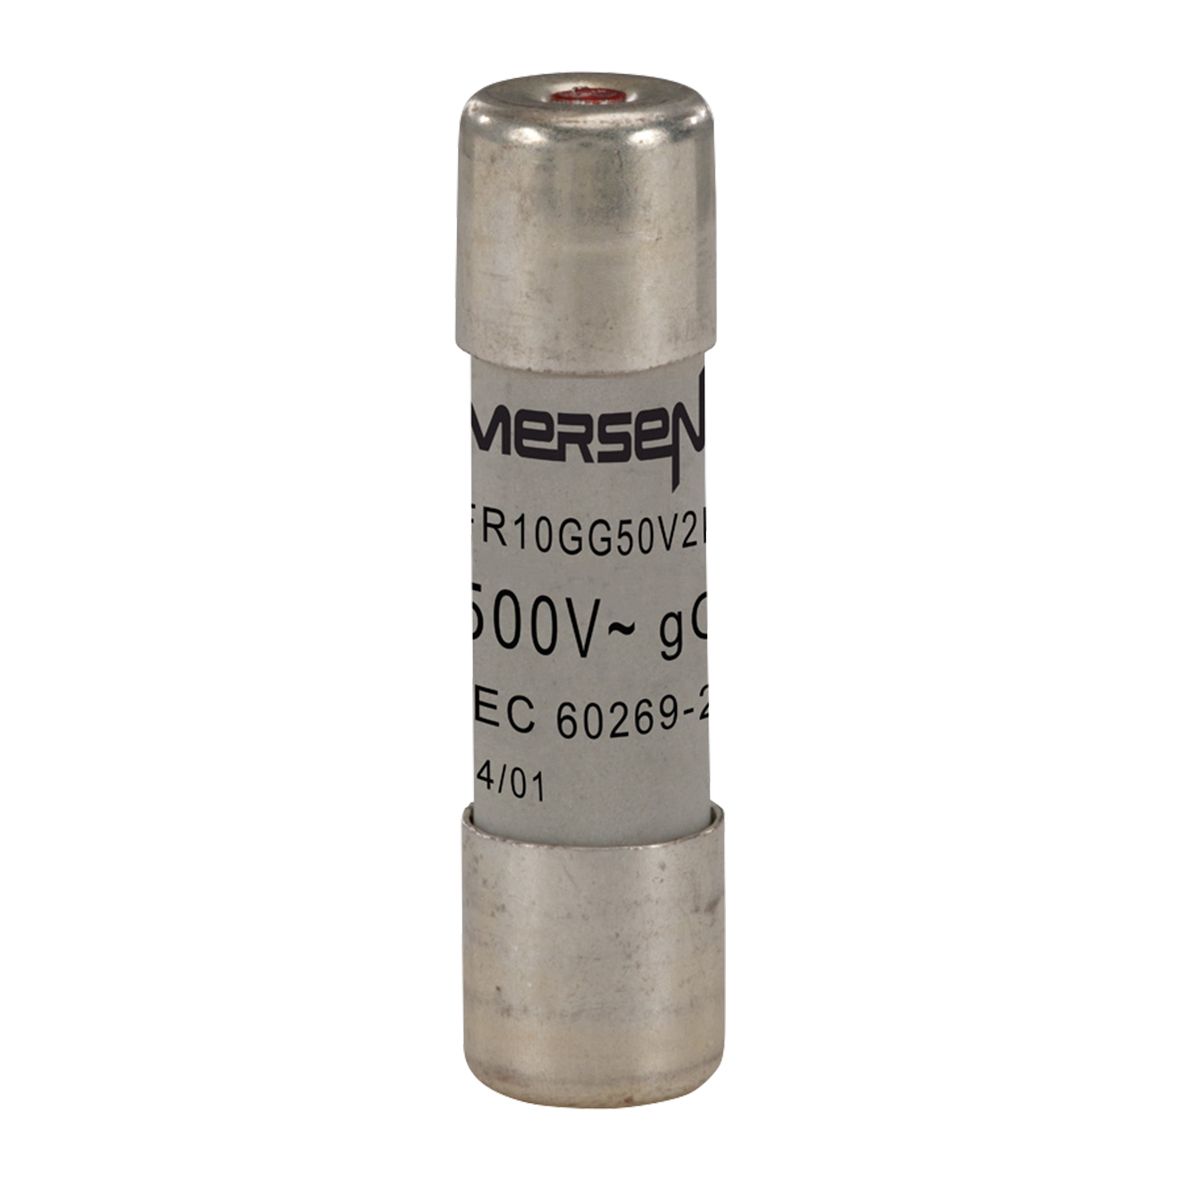 S216653 - Cylindrical fuse-link gG 500VAC 10.3x38, 2A with indicator